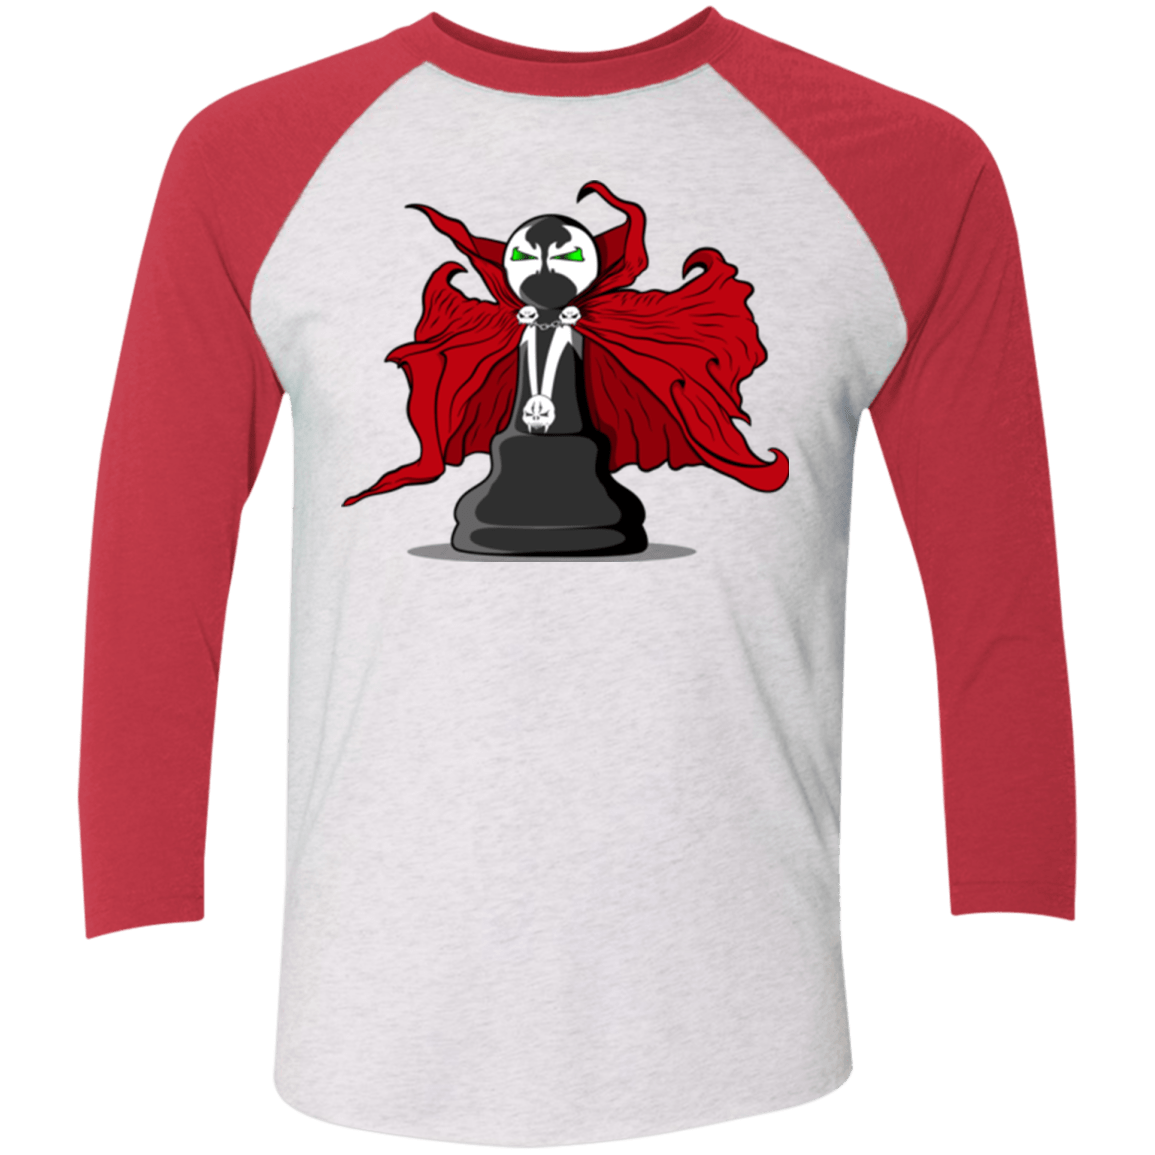 T-Shirts Heather White/Vintage Red / X-Small Hells Pawn Men's Triblend 3/4 Sleeve